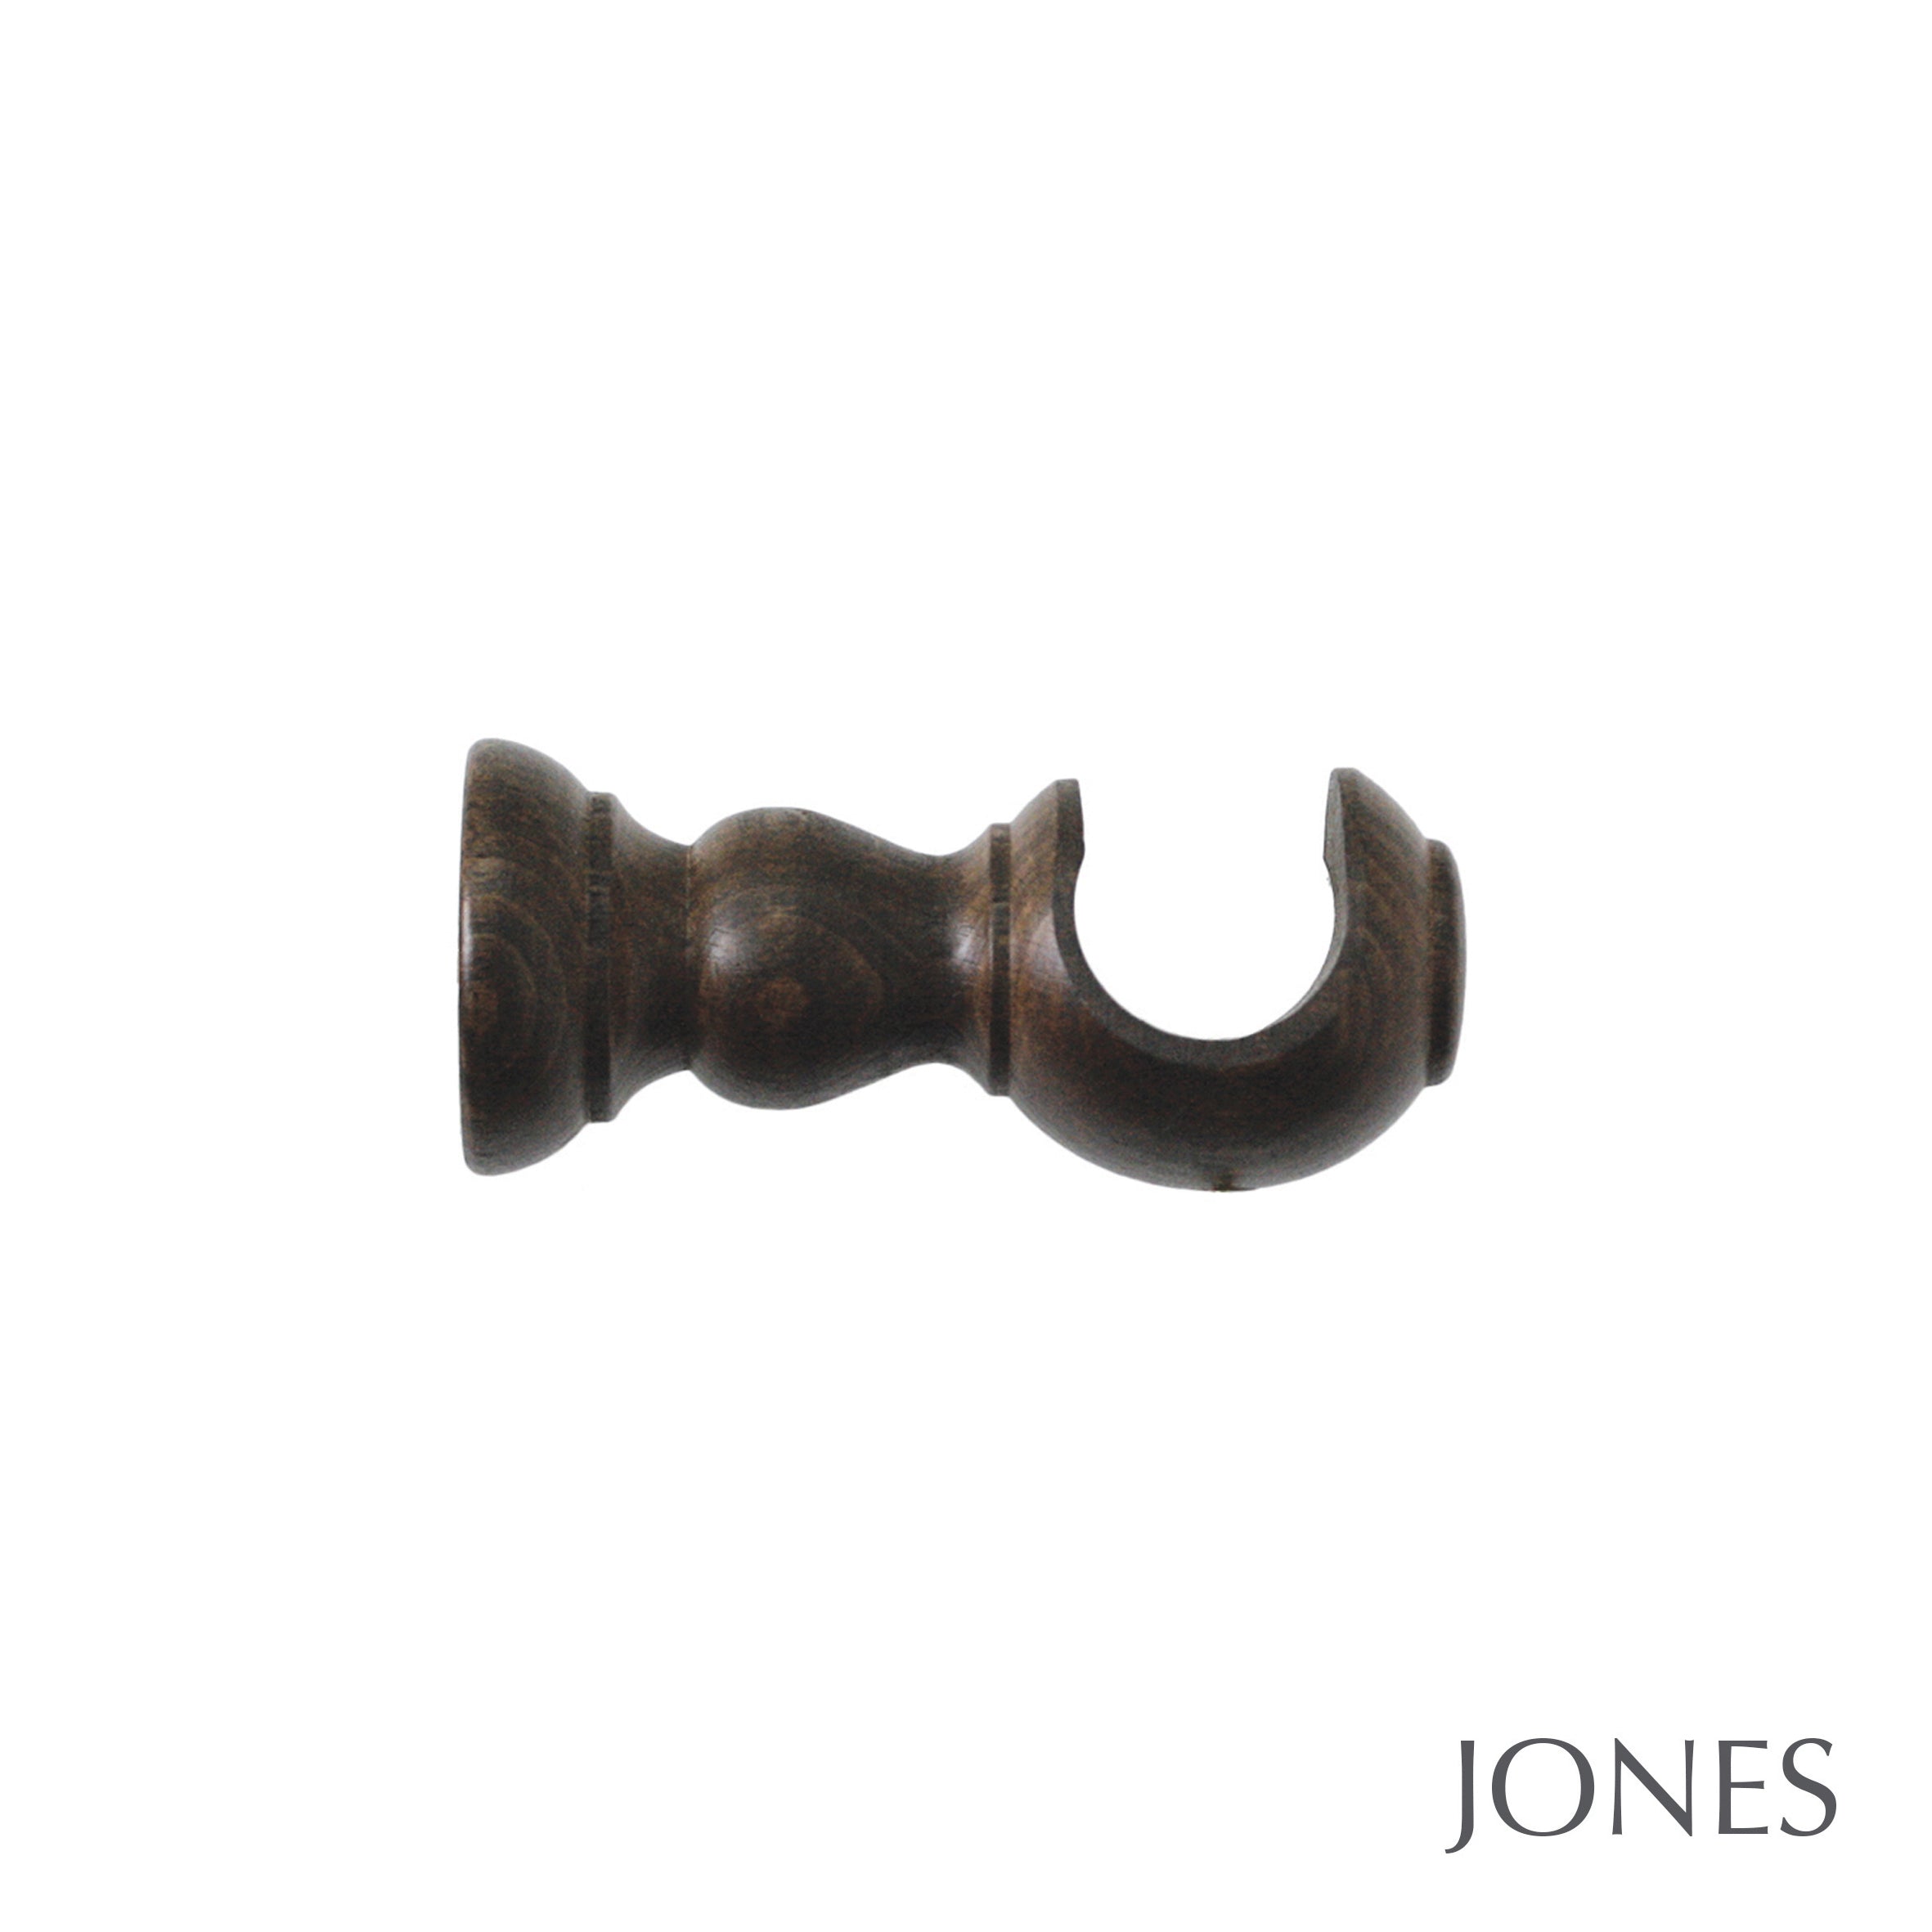 Jones Interiors Cathedral Ely Finial Curtain Pole Set in Oak